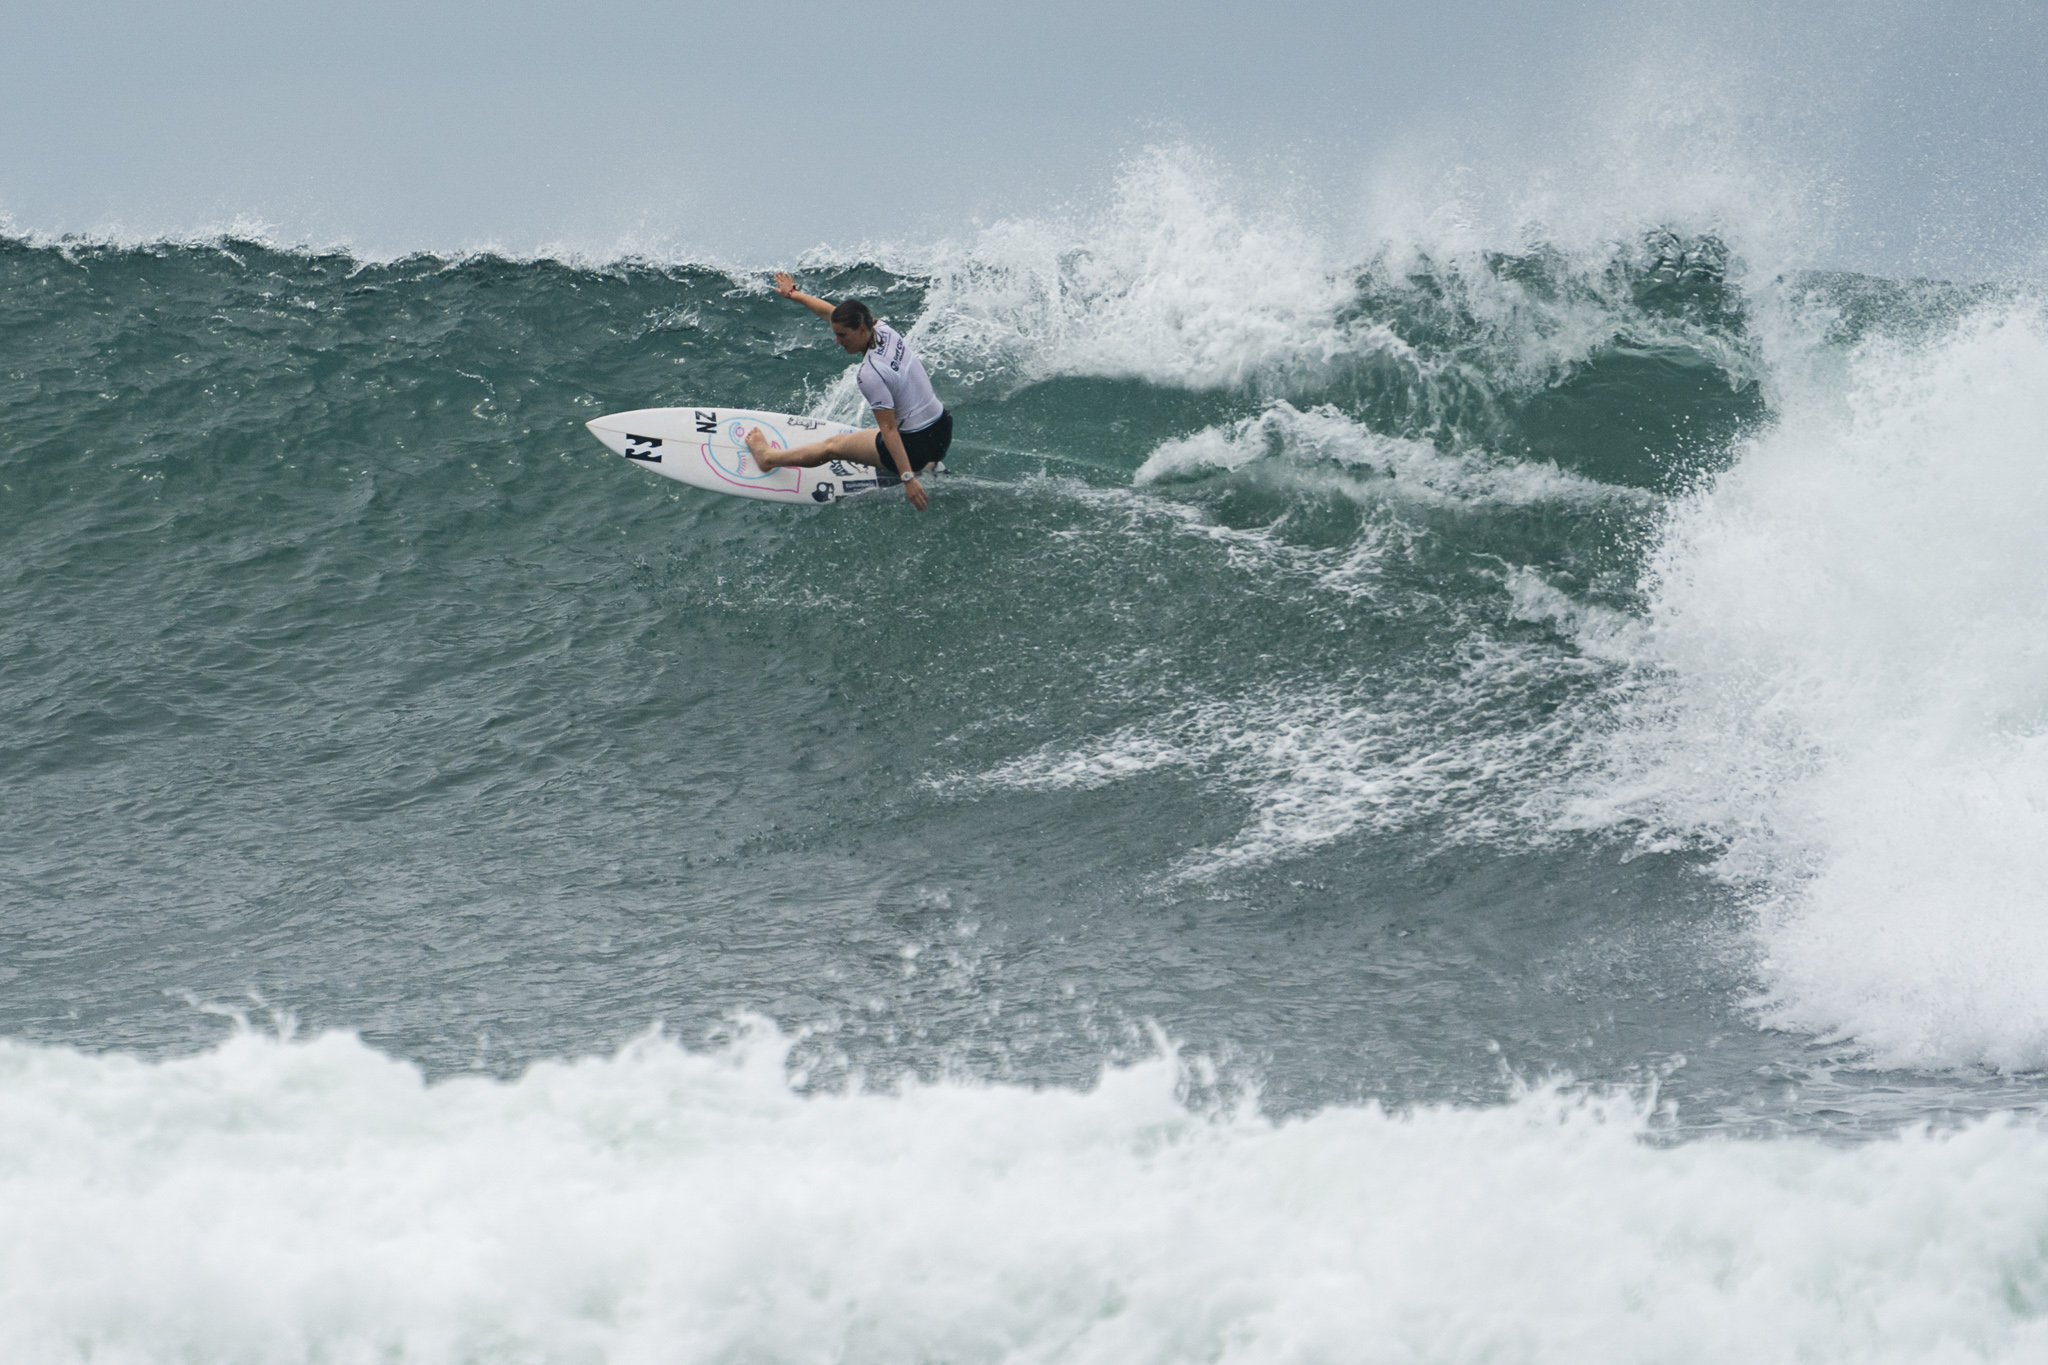 Saffi Vette's Olympic Campaign Comes To An End - New Zealand Surf Journal